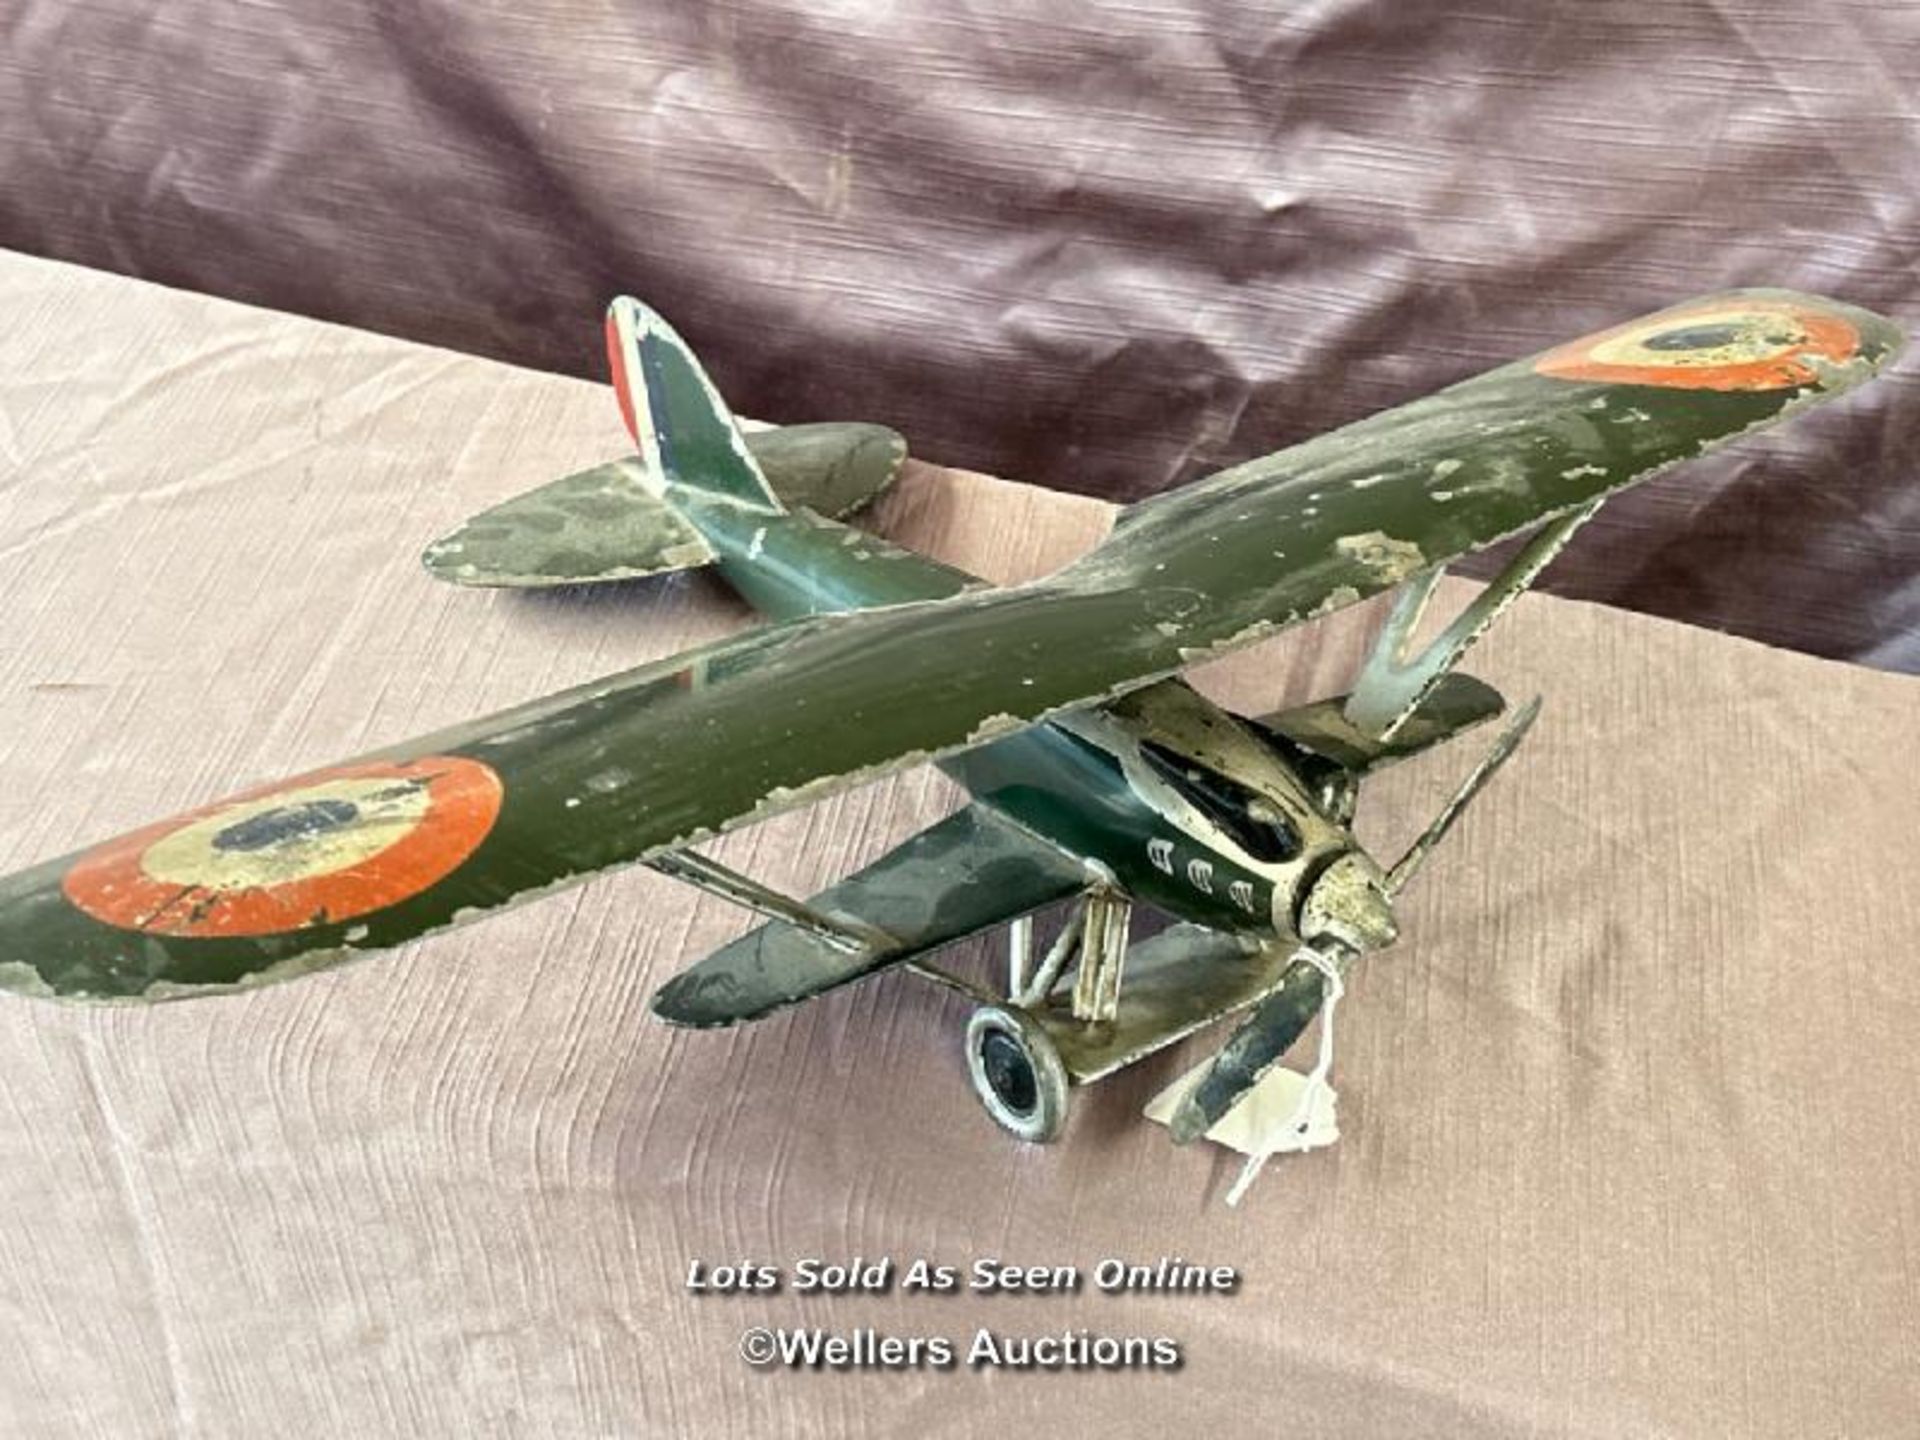 1:72 SCALE ROUGH BUILT METAL MODEL AIRPLANE WORLD WAR ONE FRENCH NIEUPORT-DELAGE NID 52 - Image 3 of 5